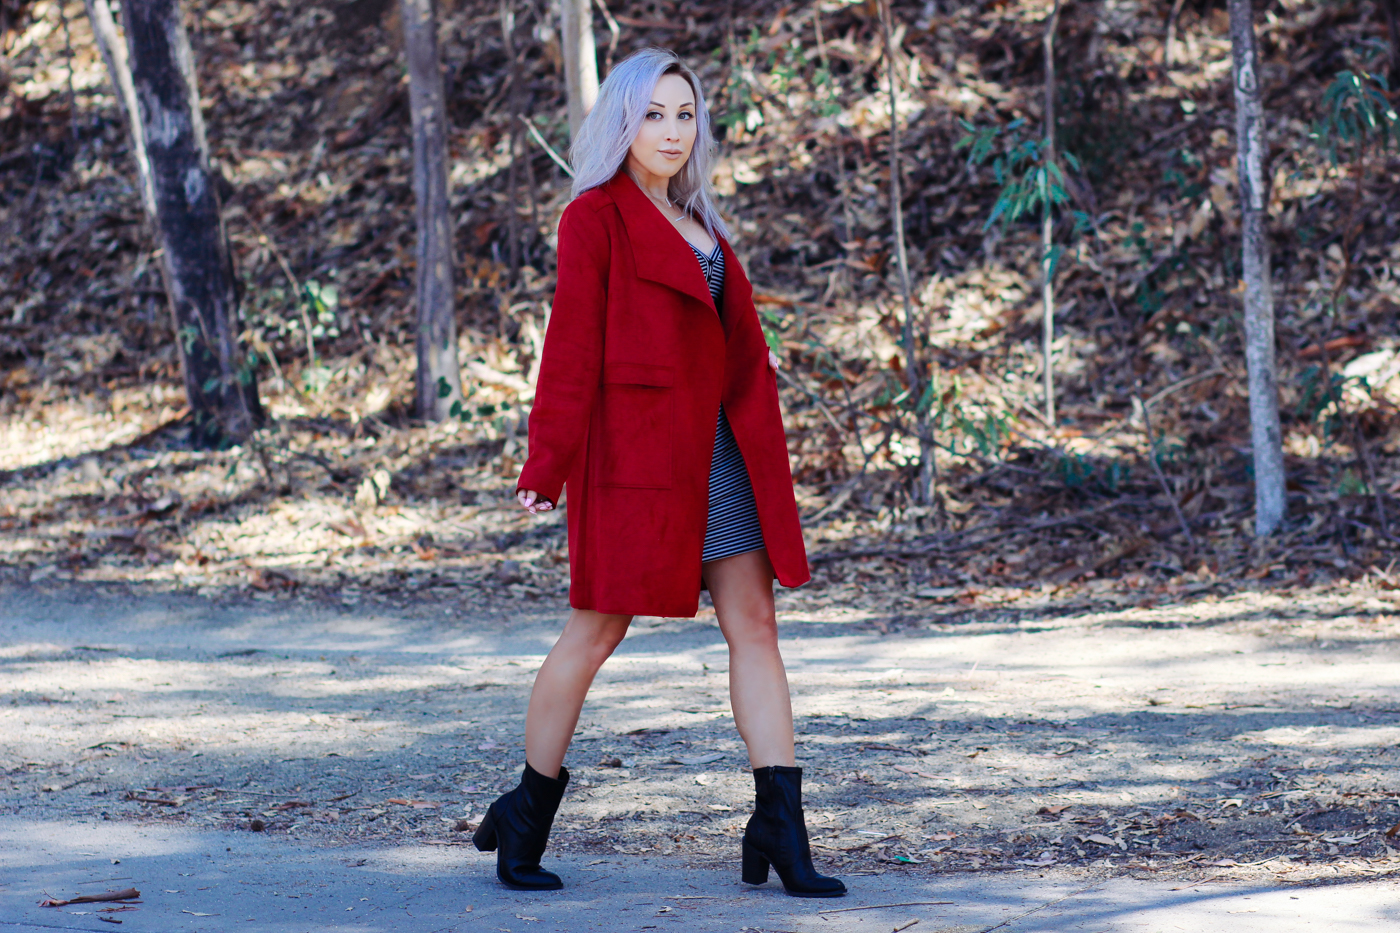 Blondie in the City | Red Coat, Striped Dress @justfabonline | Black Booties @shoedazzle | Fall Fashion